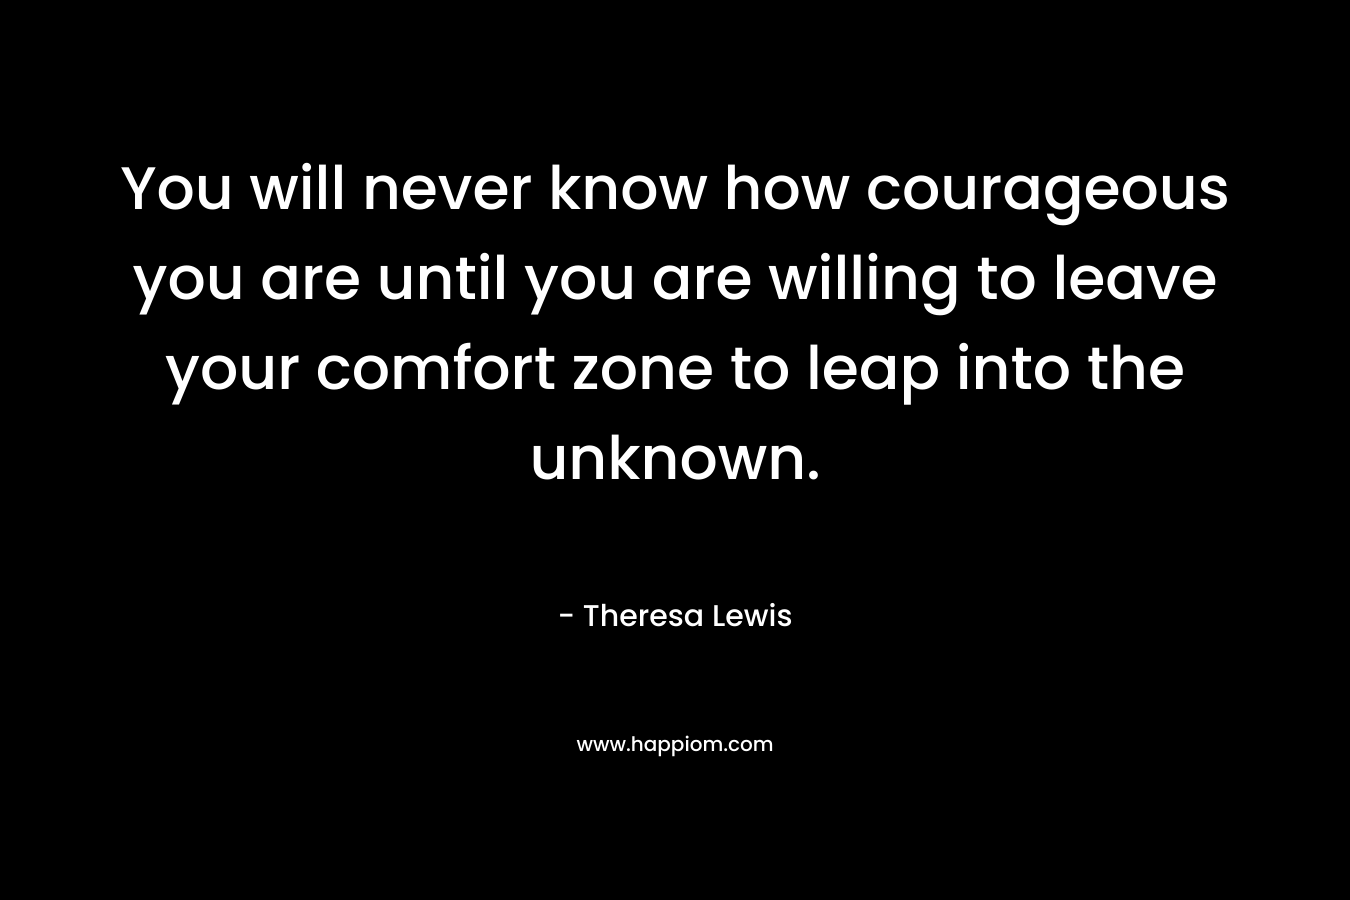 You will never know how courageous you are until you are willing to leave your comfort zone to leap into the unknown.